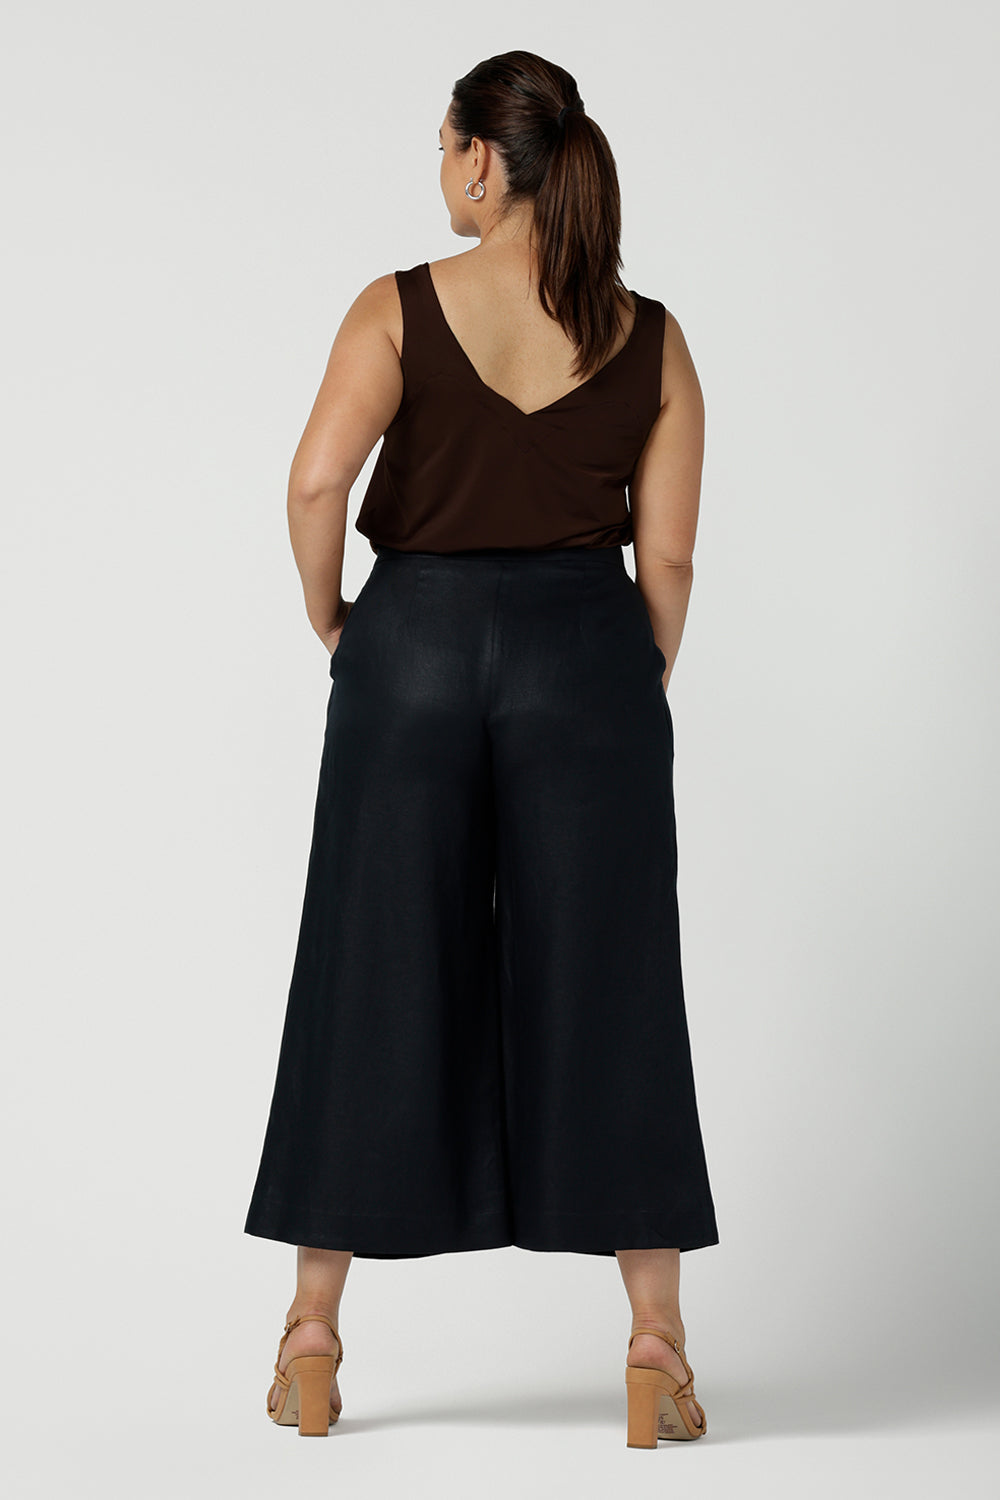 Back view of a size 12 curvy woman wears a Midnight linen Nik Pant in linen. Side zip and button front with pleats. Styled back with Eddy cami in Cocoa. Made in Australia for women size 8 - 24.